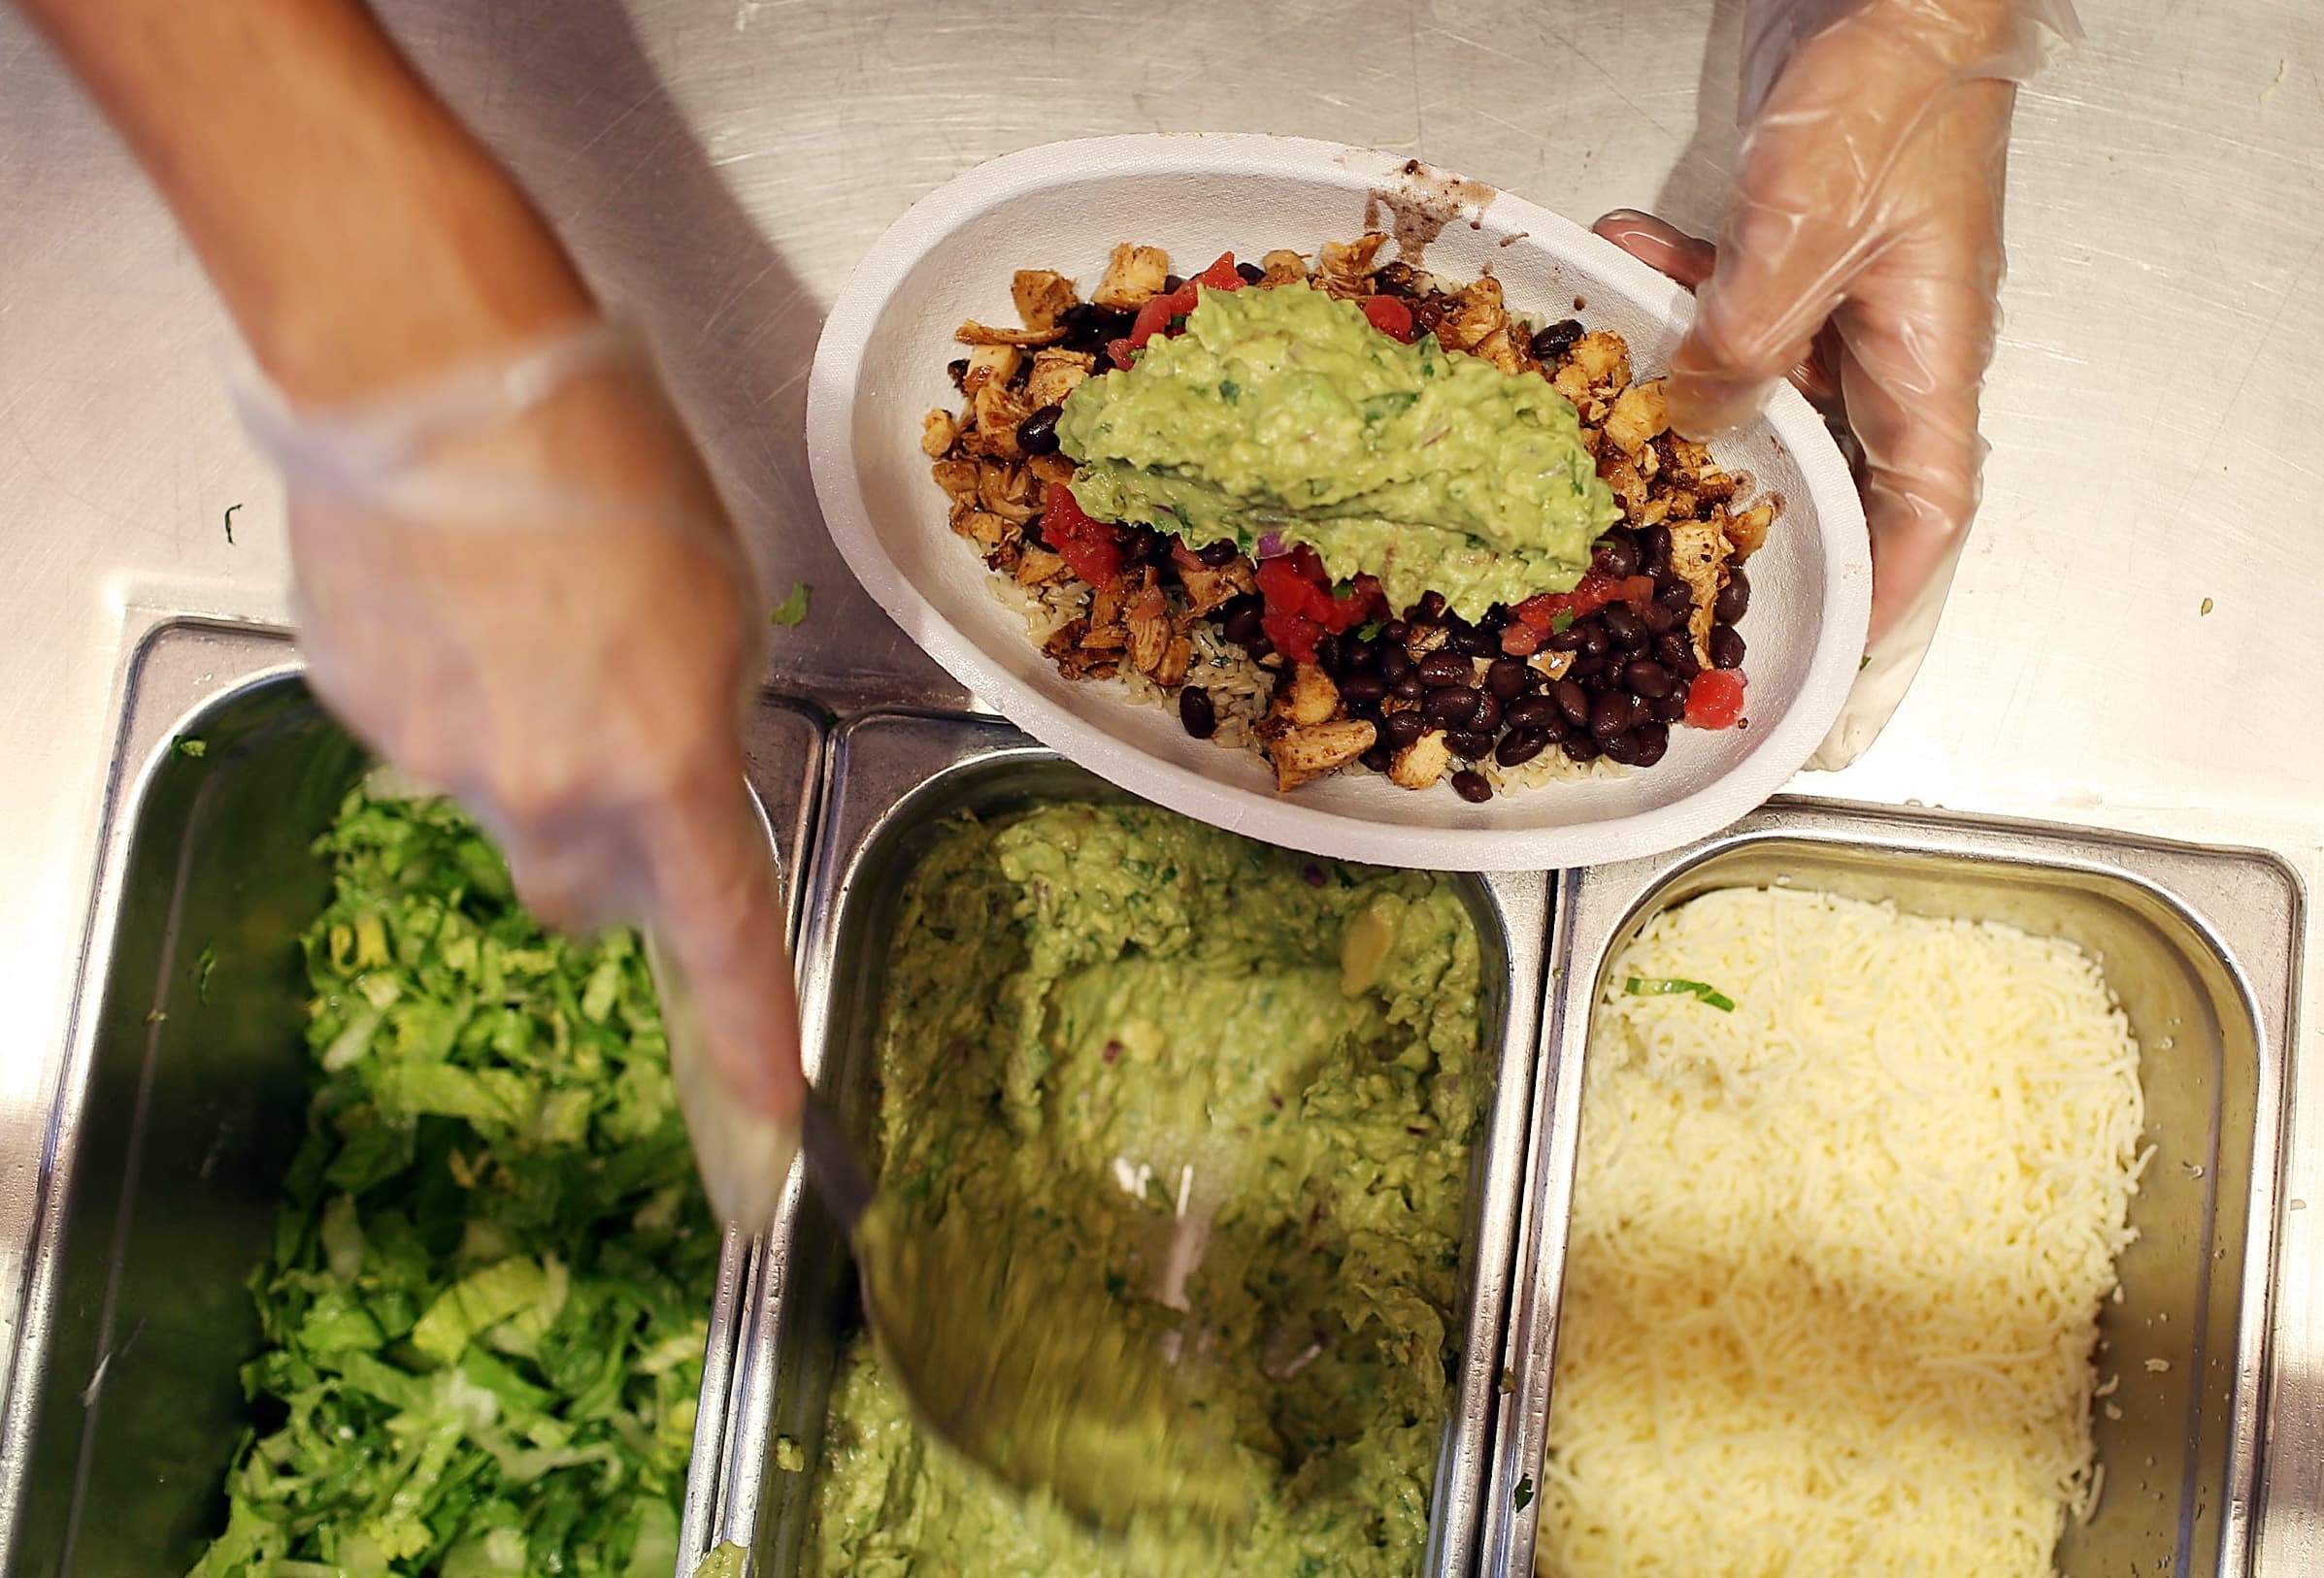 Falling avocado shipments could hurt Chipotle’s margins, analyst says